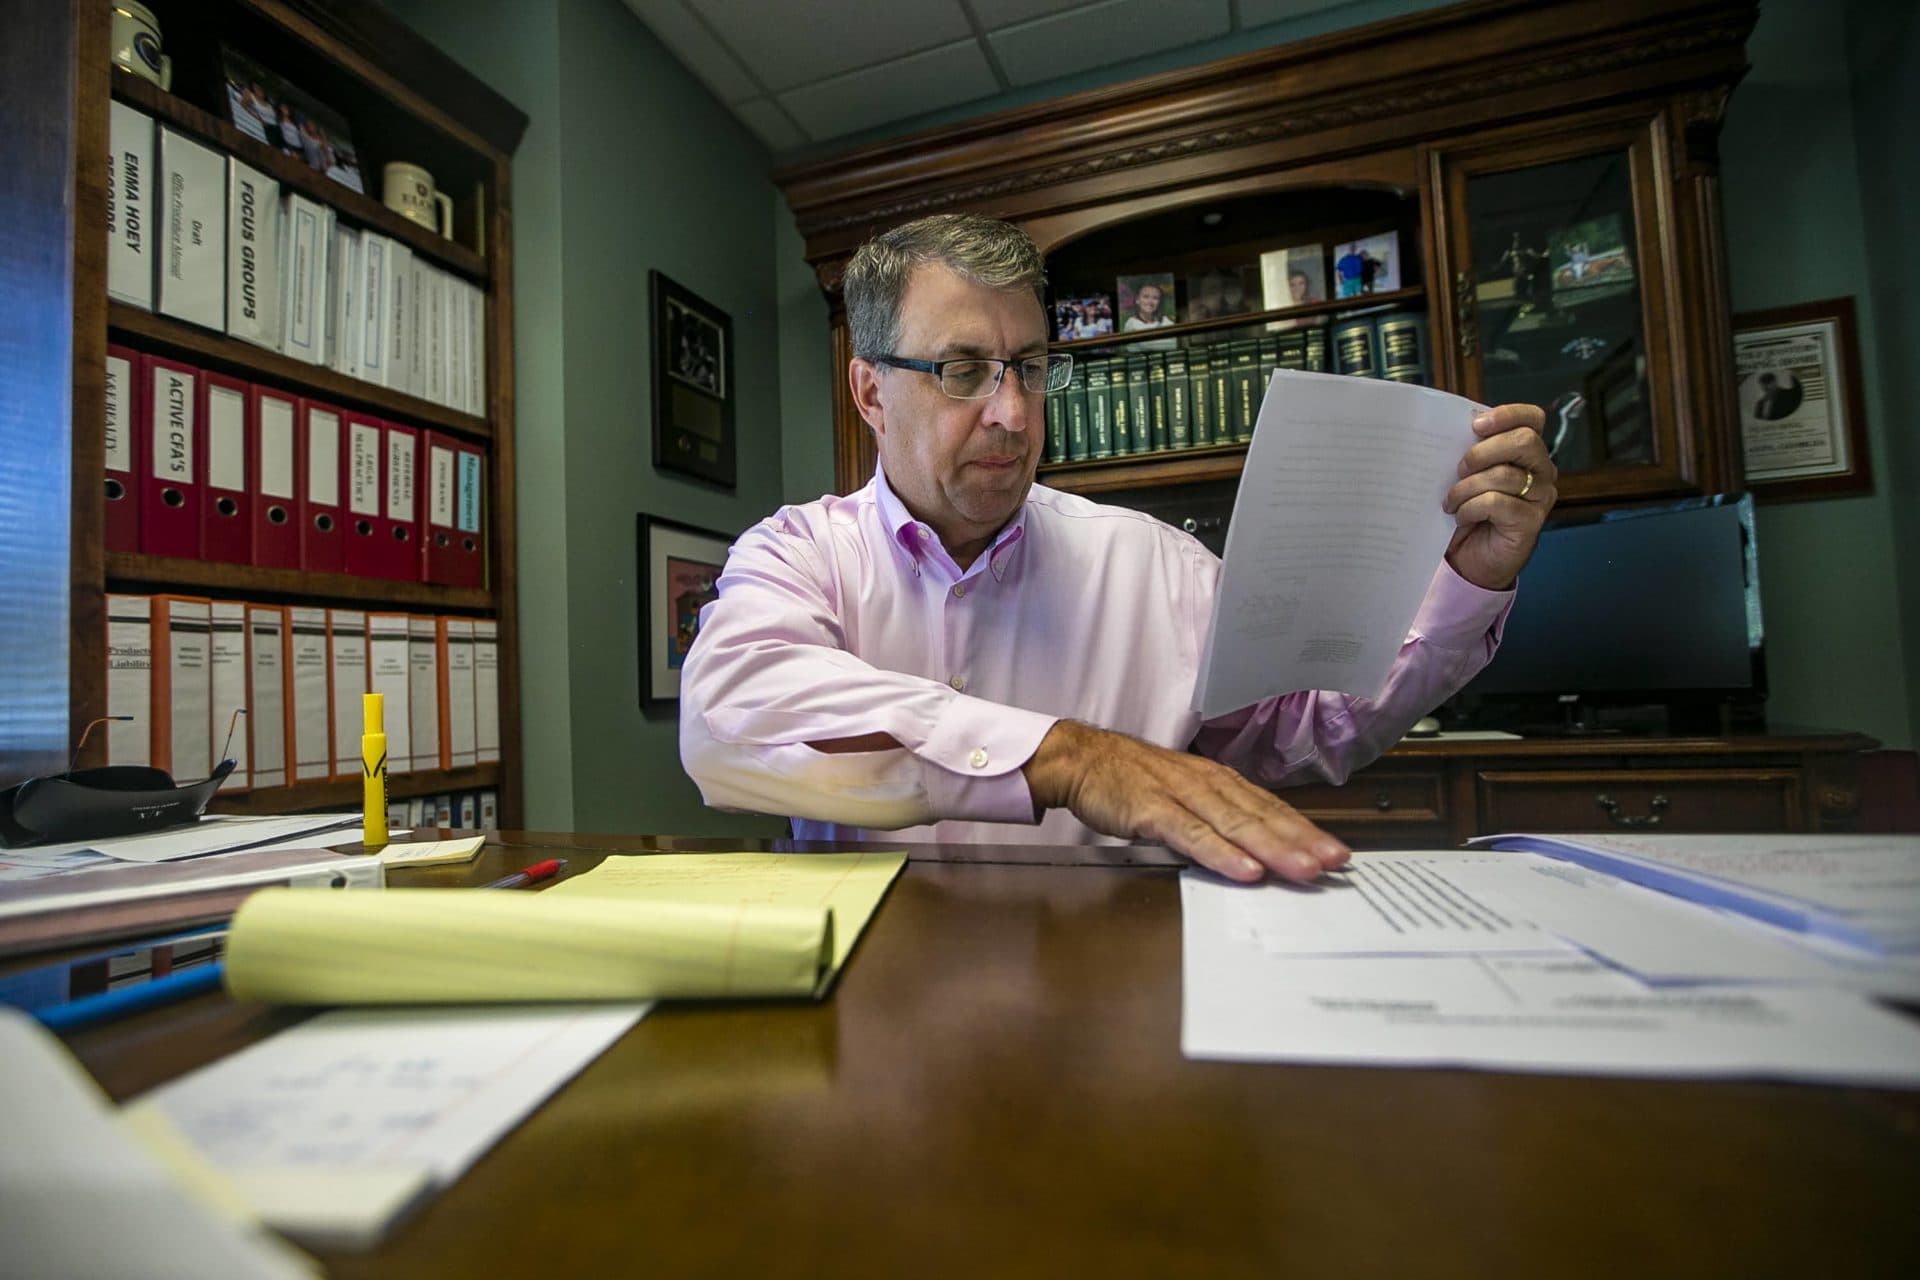 Attorney David Hoey works in his office in North Reading. (Jesse Costa/WBUR)